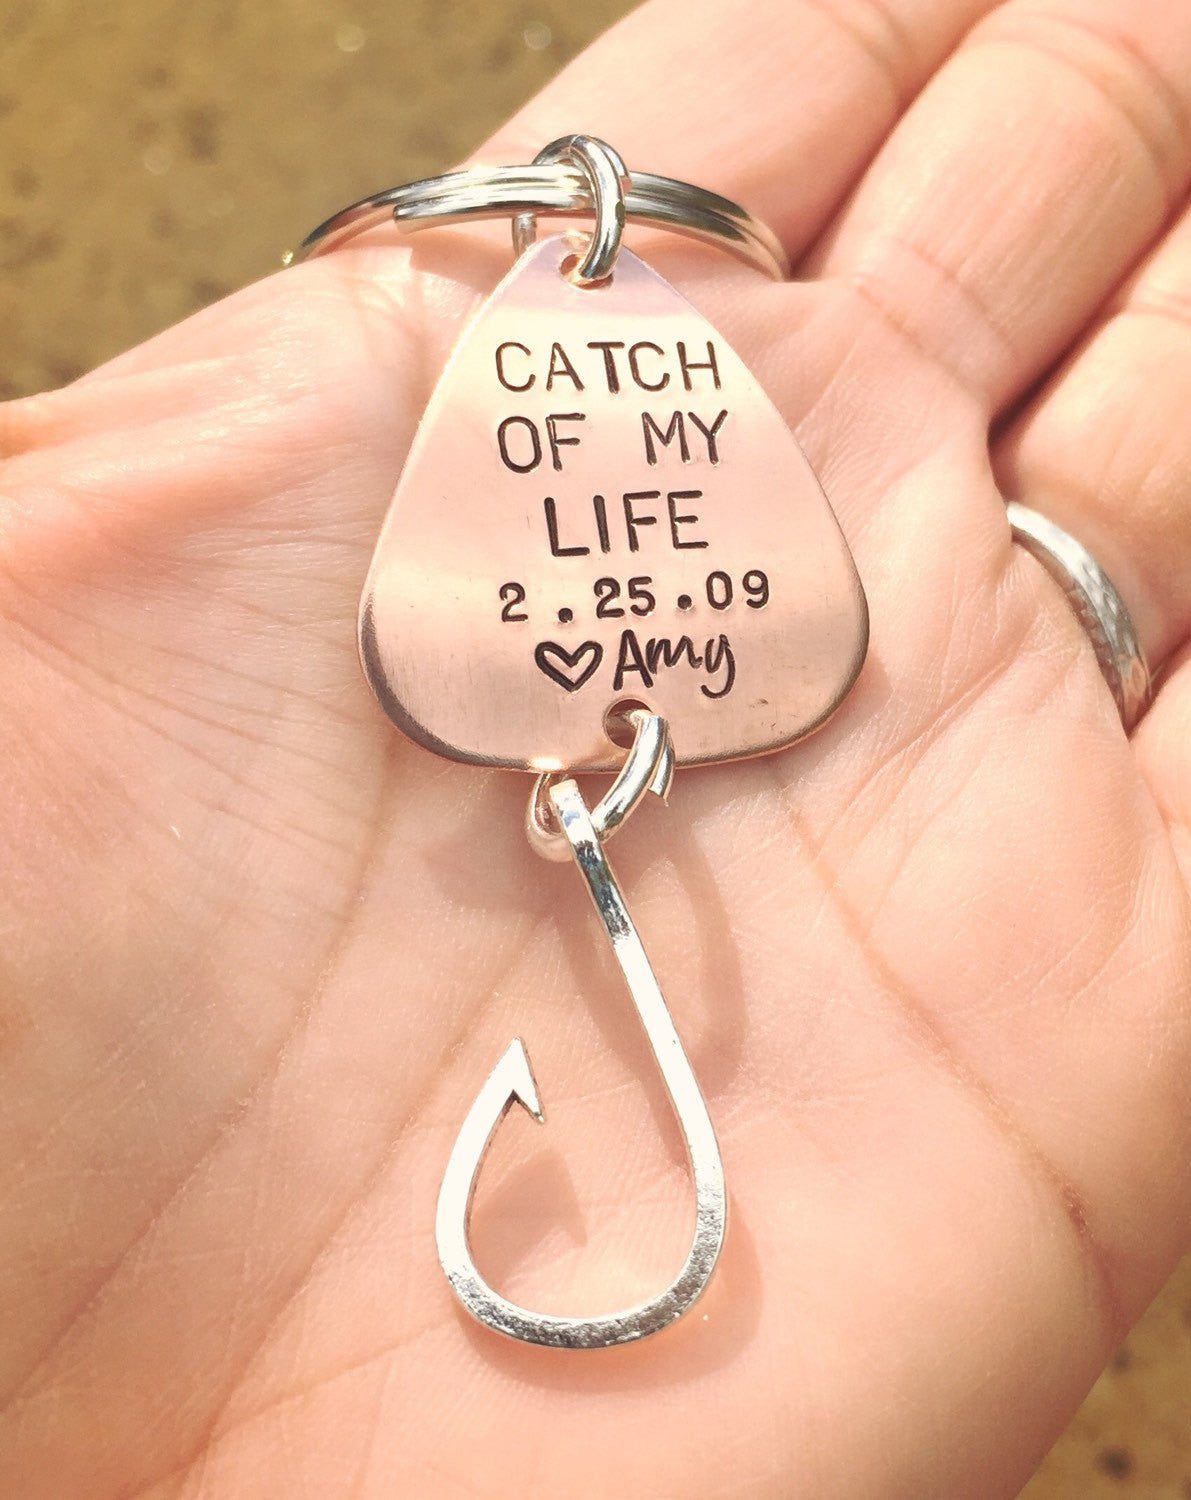 Fishing Keychain , Boyfriend Gifts - Natashaaloha, jewelry, bracelets, necklace, keychains, fishing lures, gifts for men, charms, personalized, 